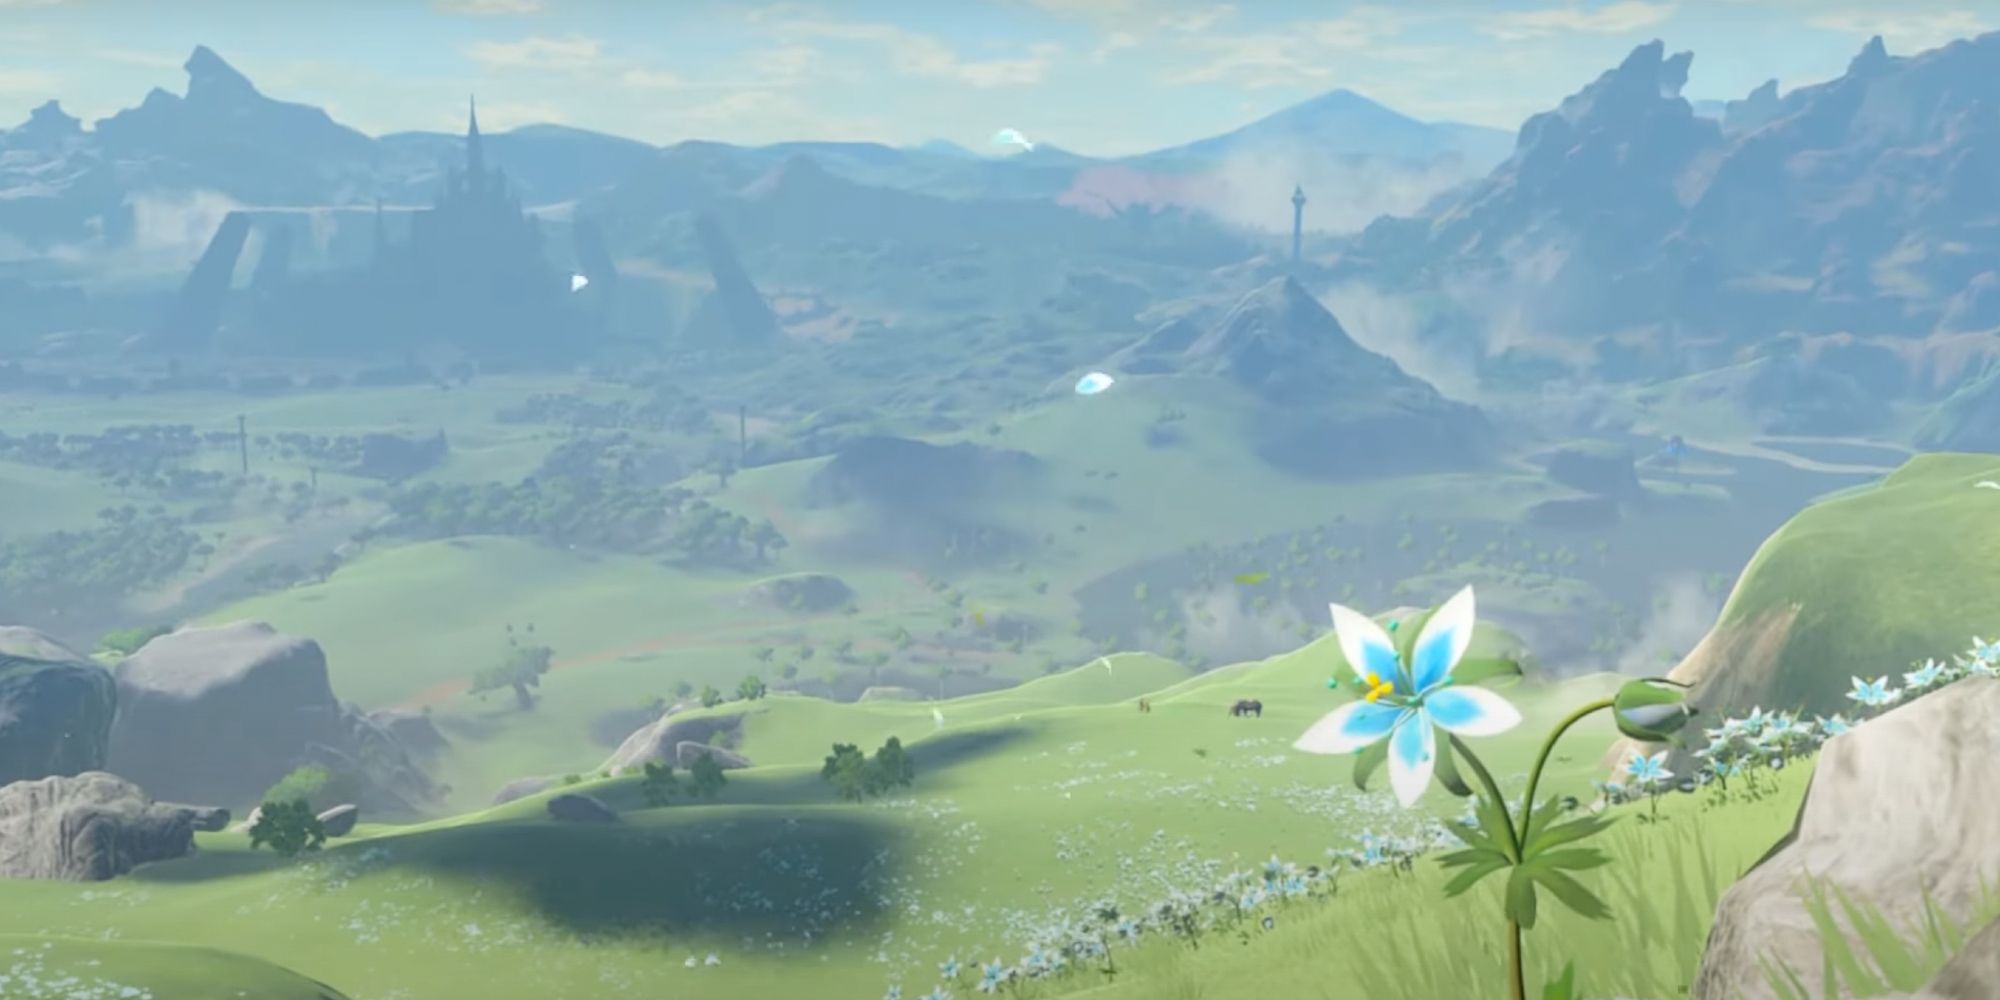 An image of Hyrule in BOTW as shown in the game's ending